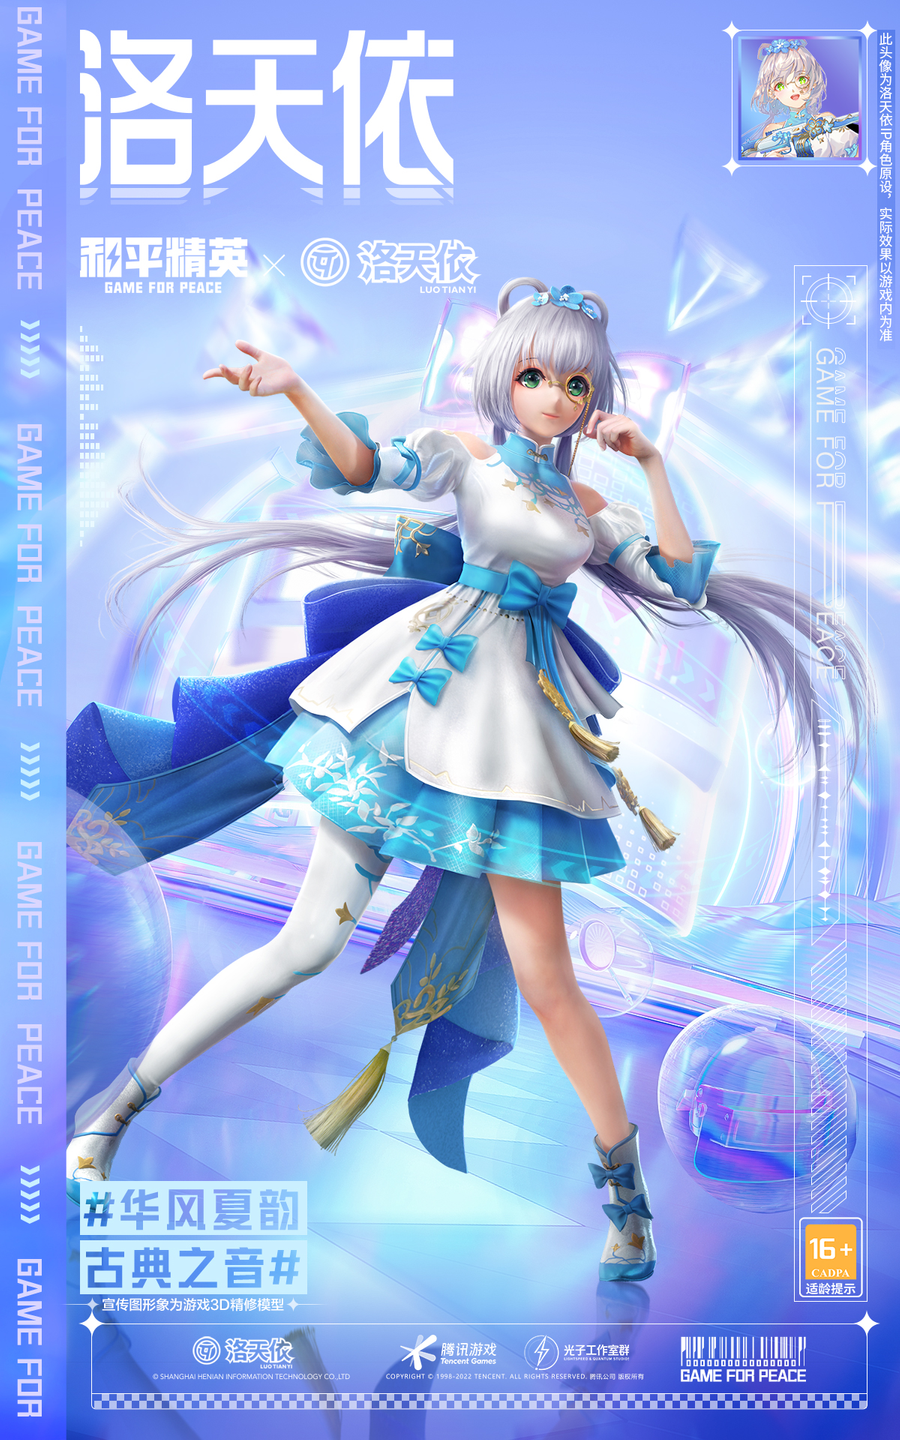 Game For Peace Held A Crossover Event With Virtual Idol From Beijing Winter Olympics Superpixel